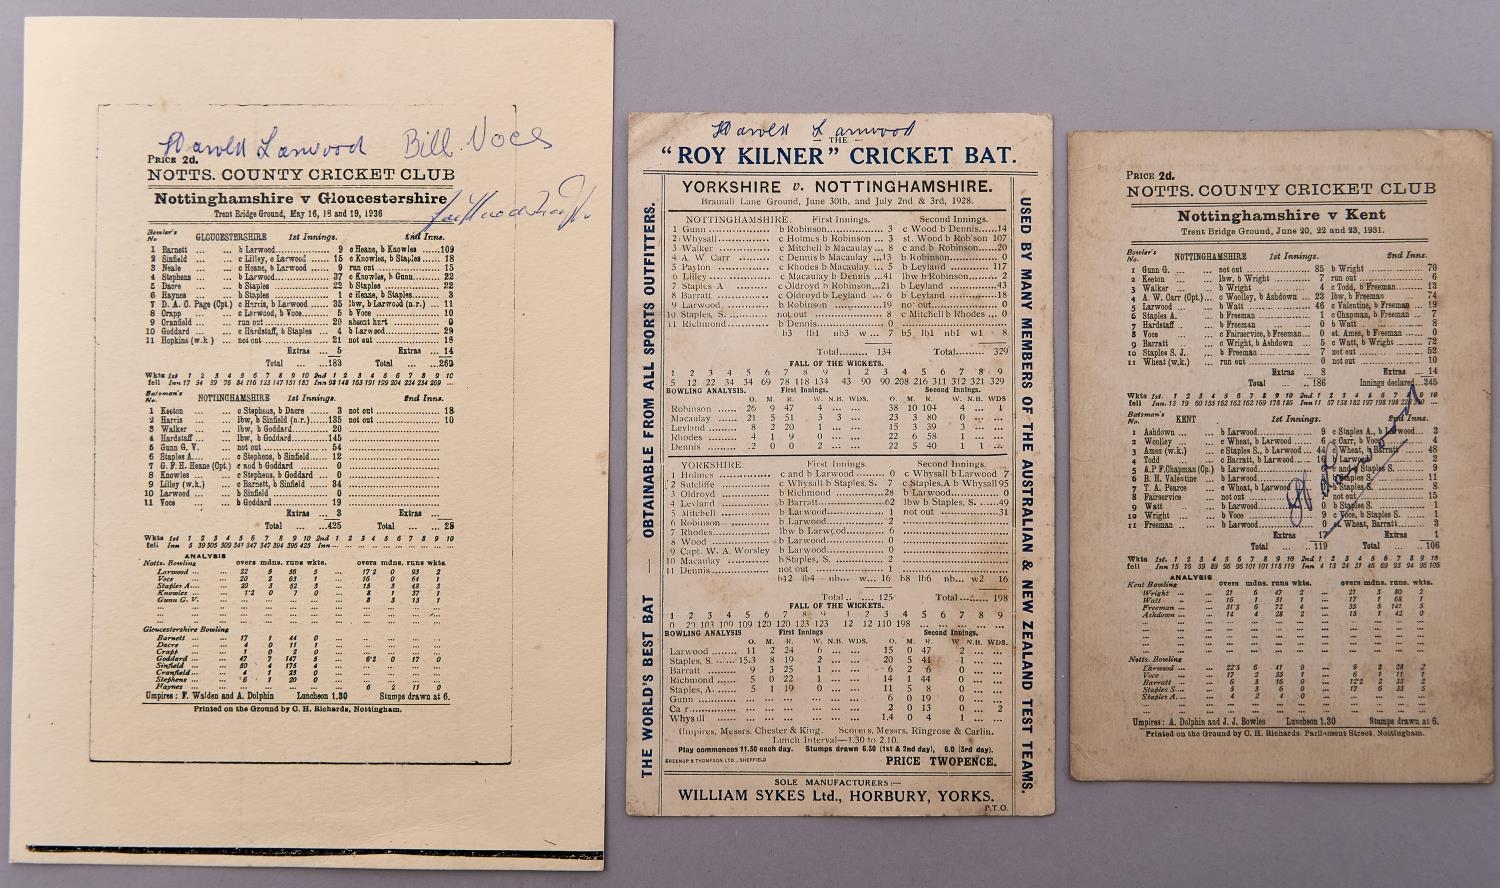 Autographs. Notts County Cricket Club, Nottinghamshire v Kent June 20, 22 and 23 1931 and